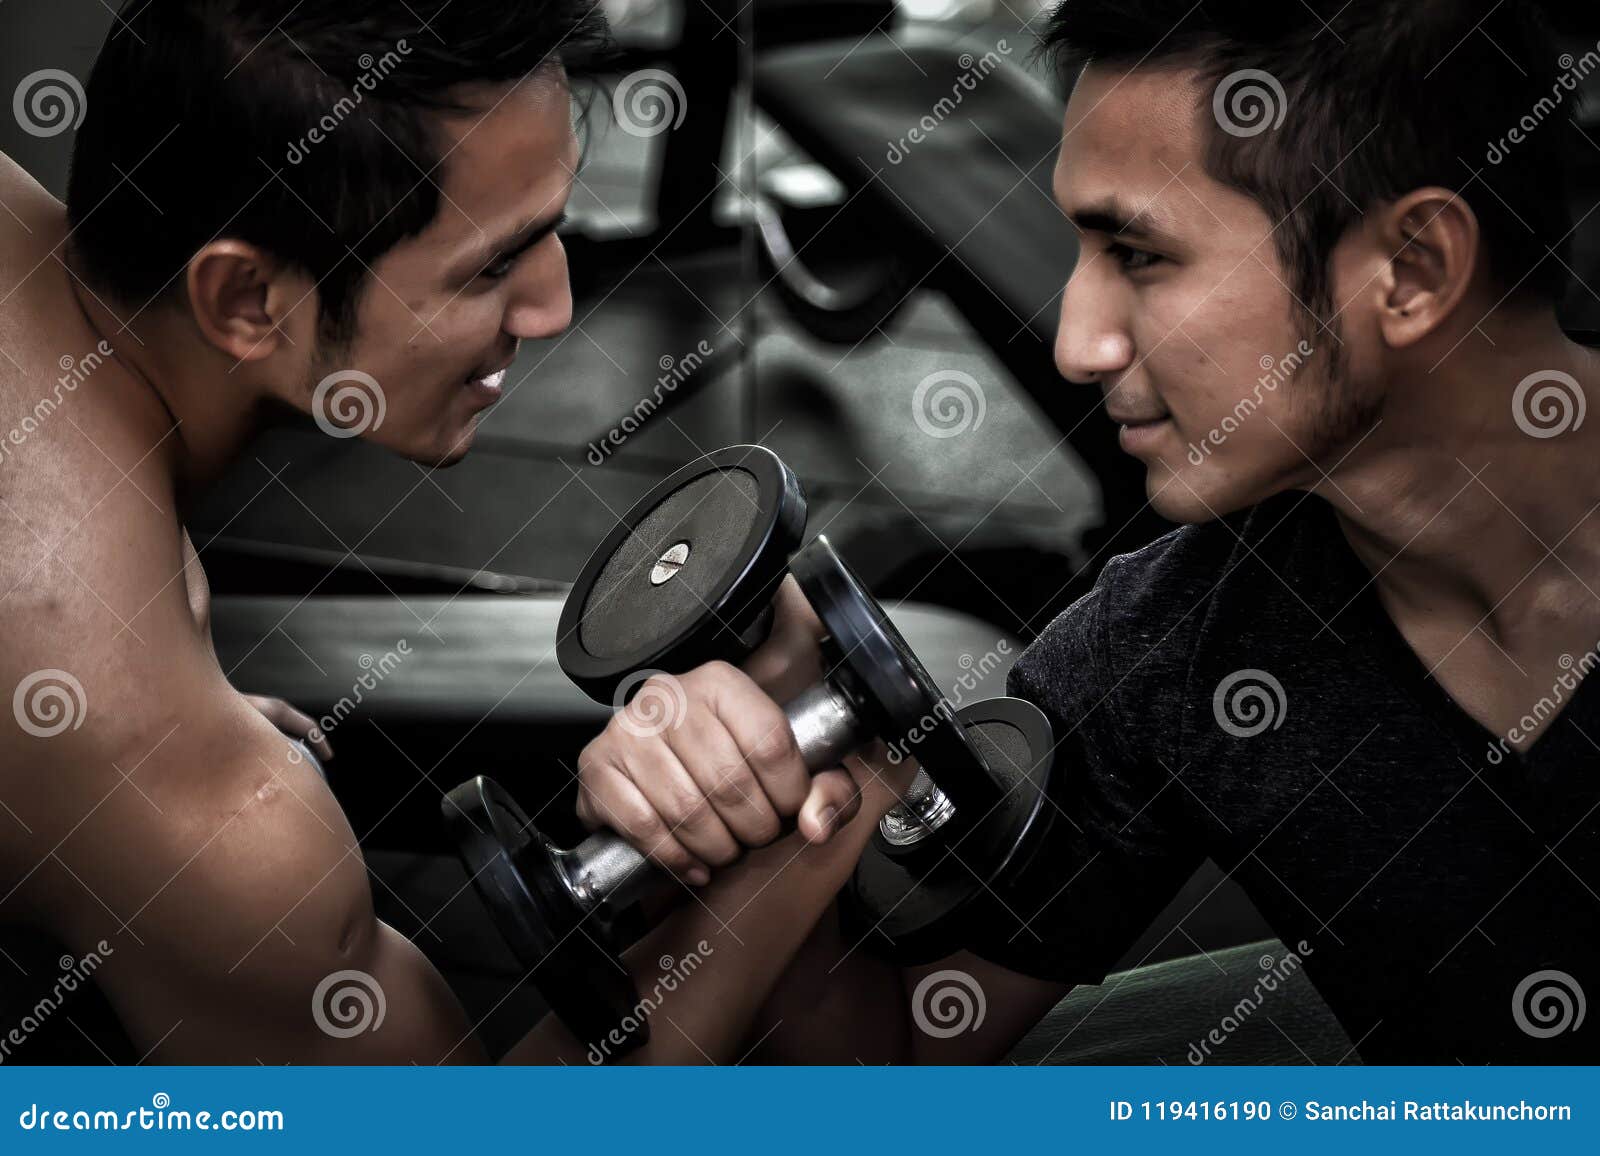 two asian men use dumbbell exercise weight-lifting arm-wrestle c